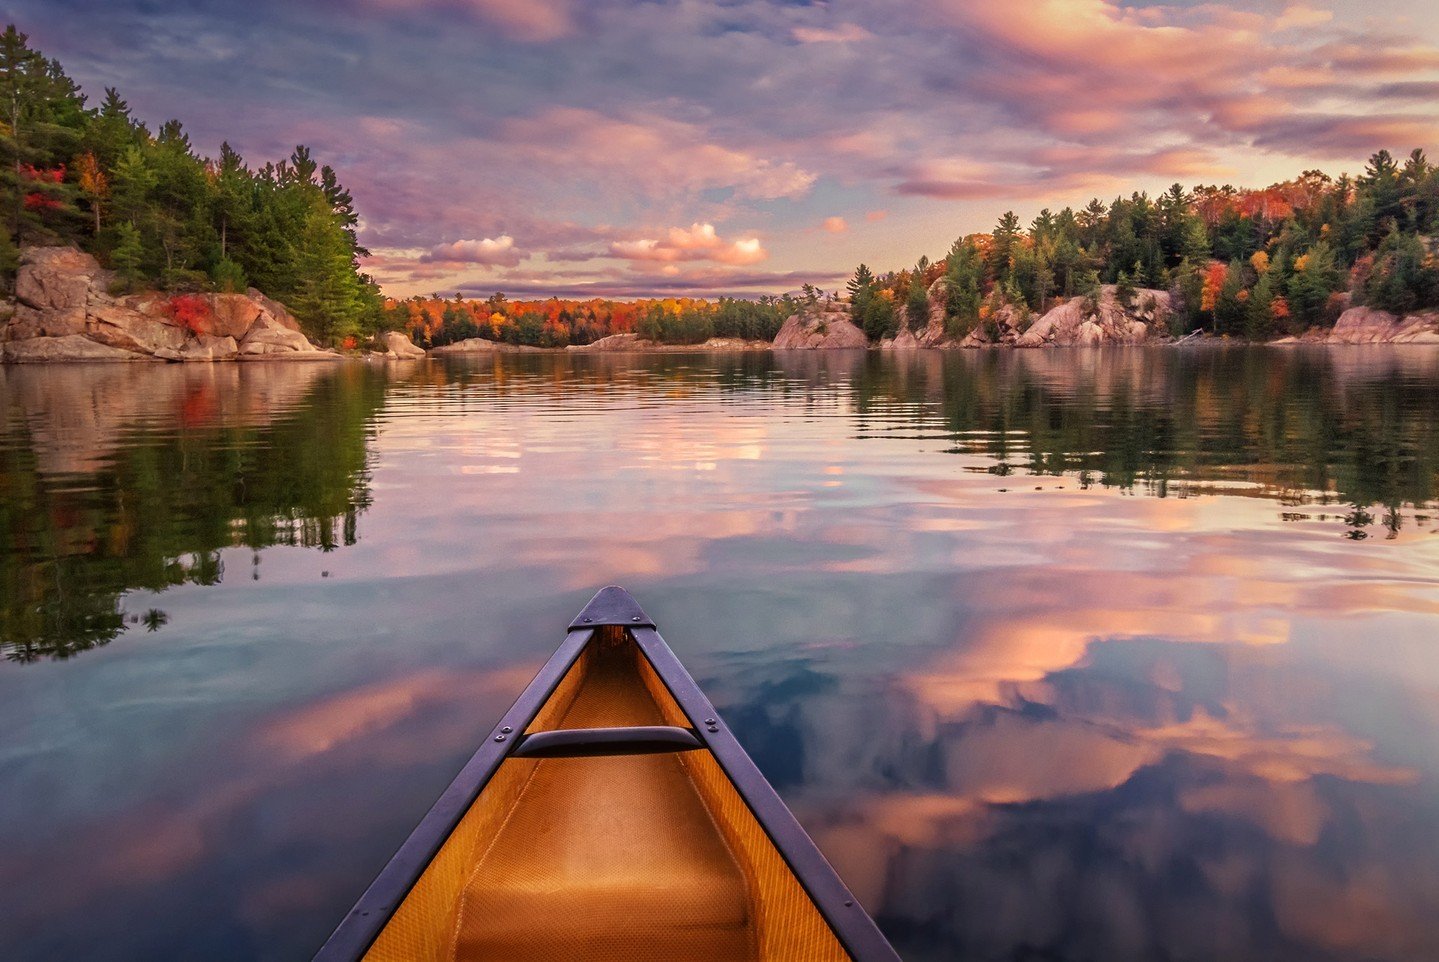 An incredible sunset moment, as we paddled our canoe on George Lake on our last evening of an autumn camping trip in Killarney Provincial Park, Ontario. Fall is a wonderful time to visit Killarney. It can be tough to get reservations in the summer, b